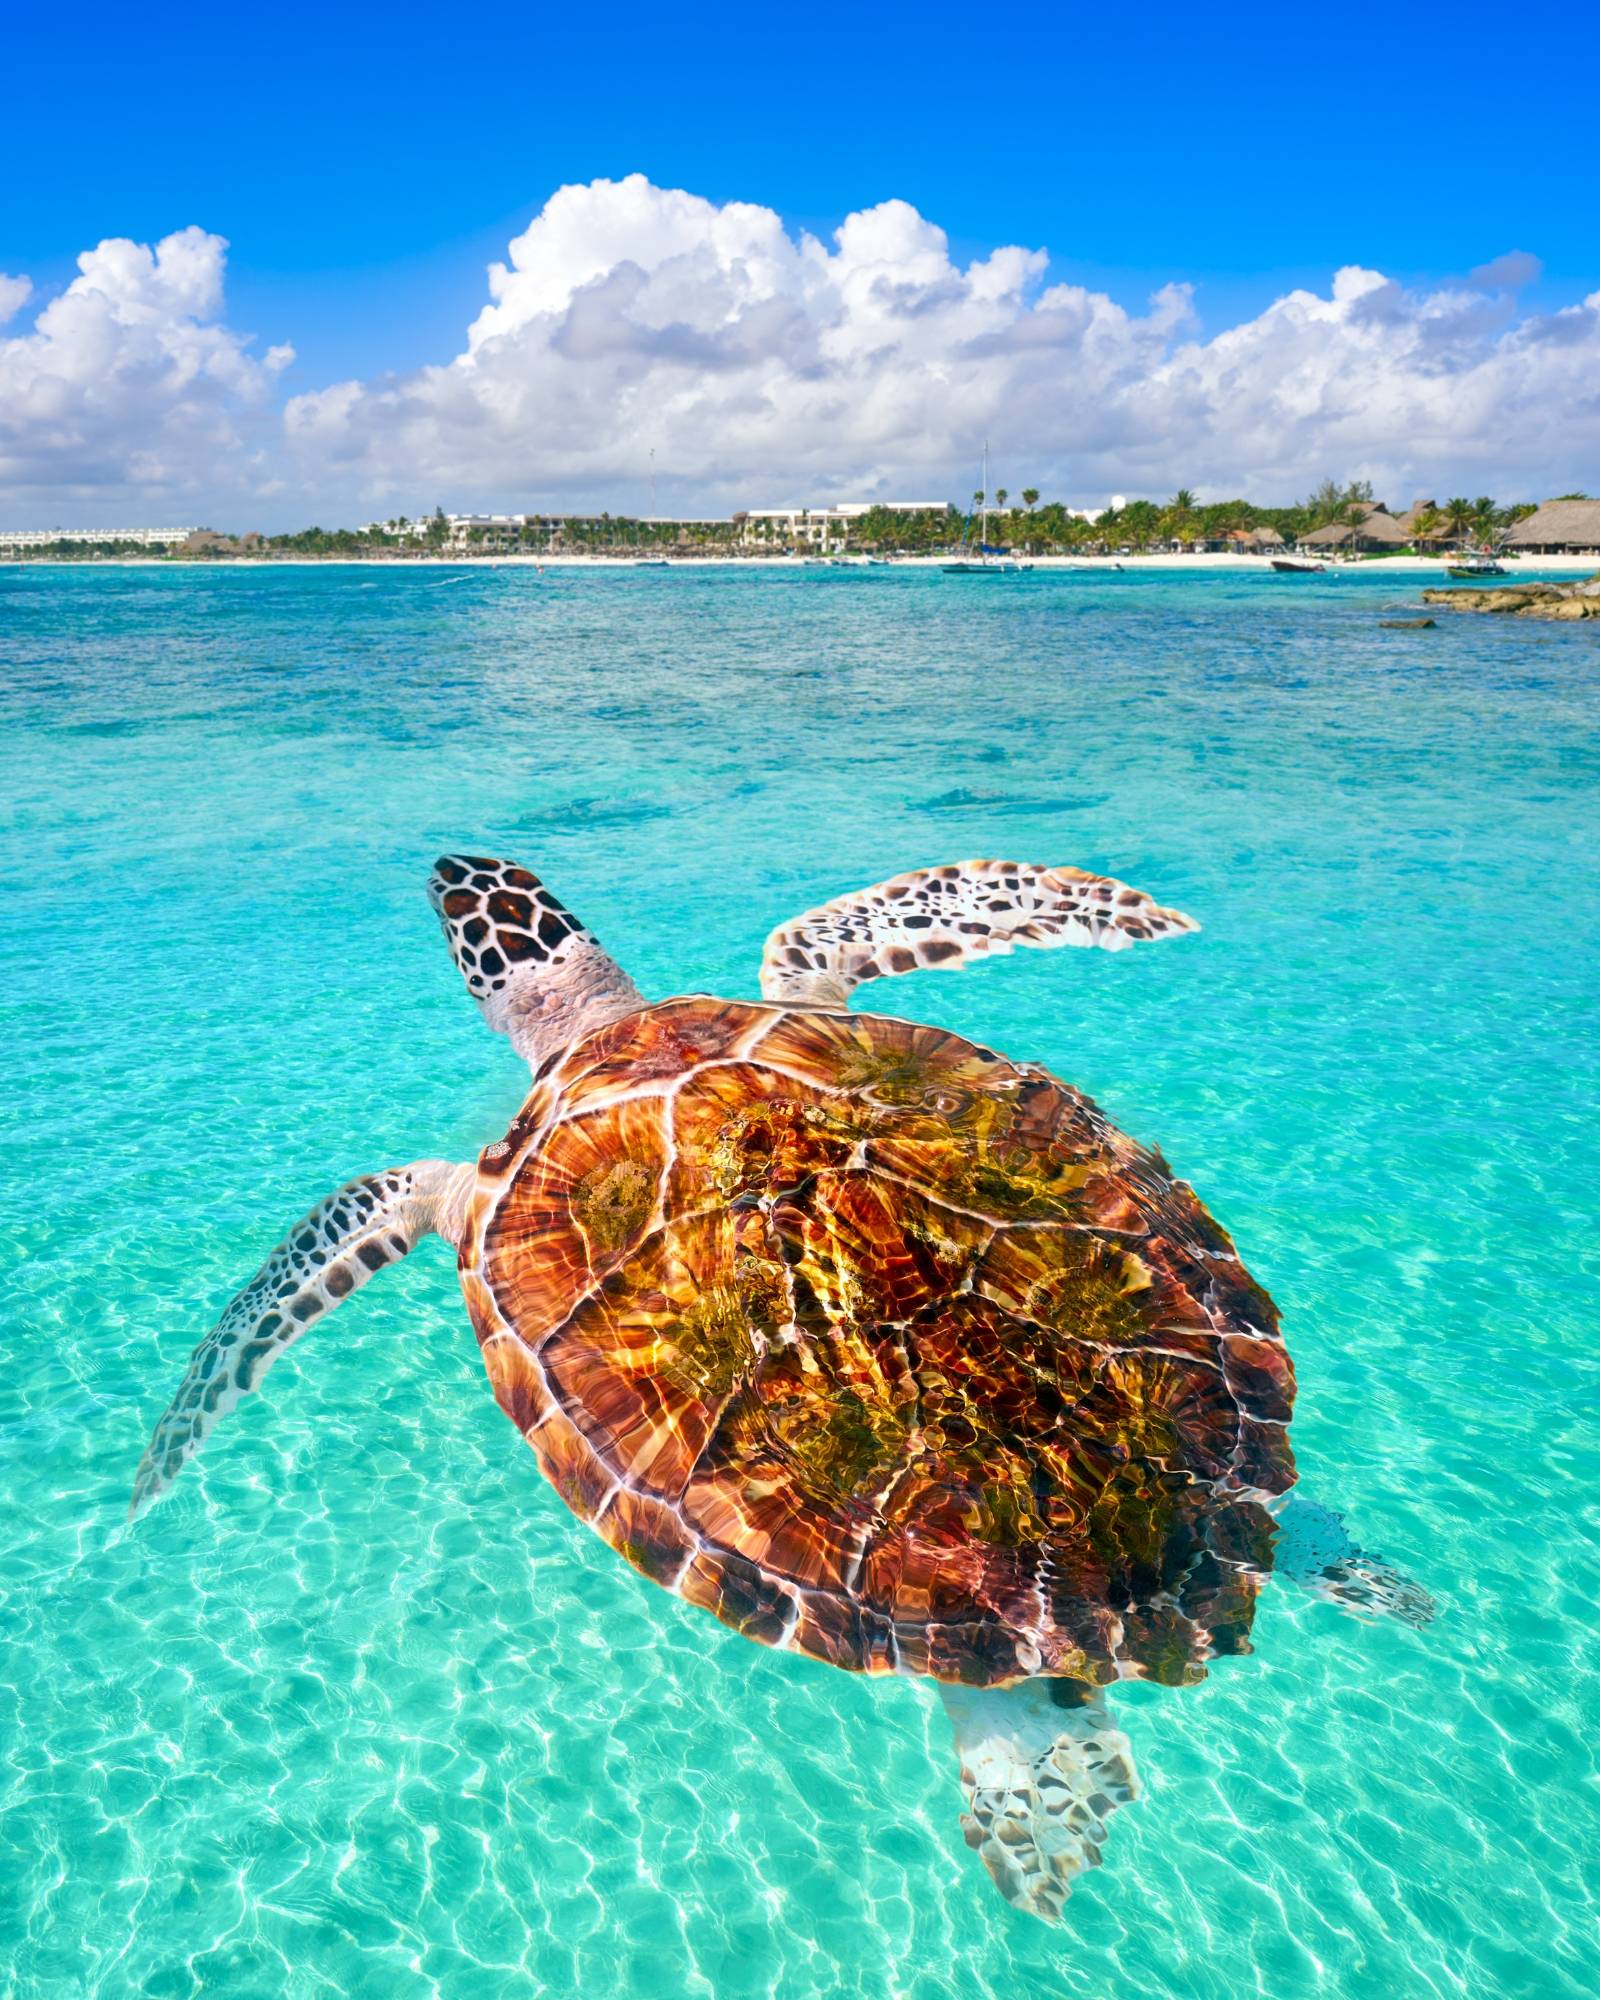 An image of a turtle swimming in the sea in Akumal